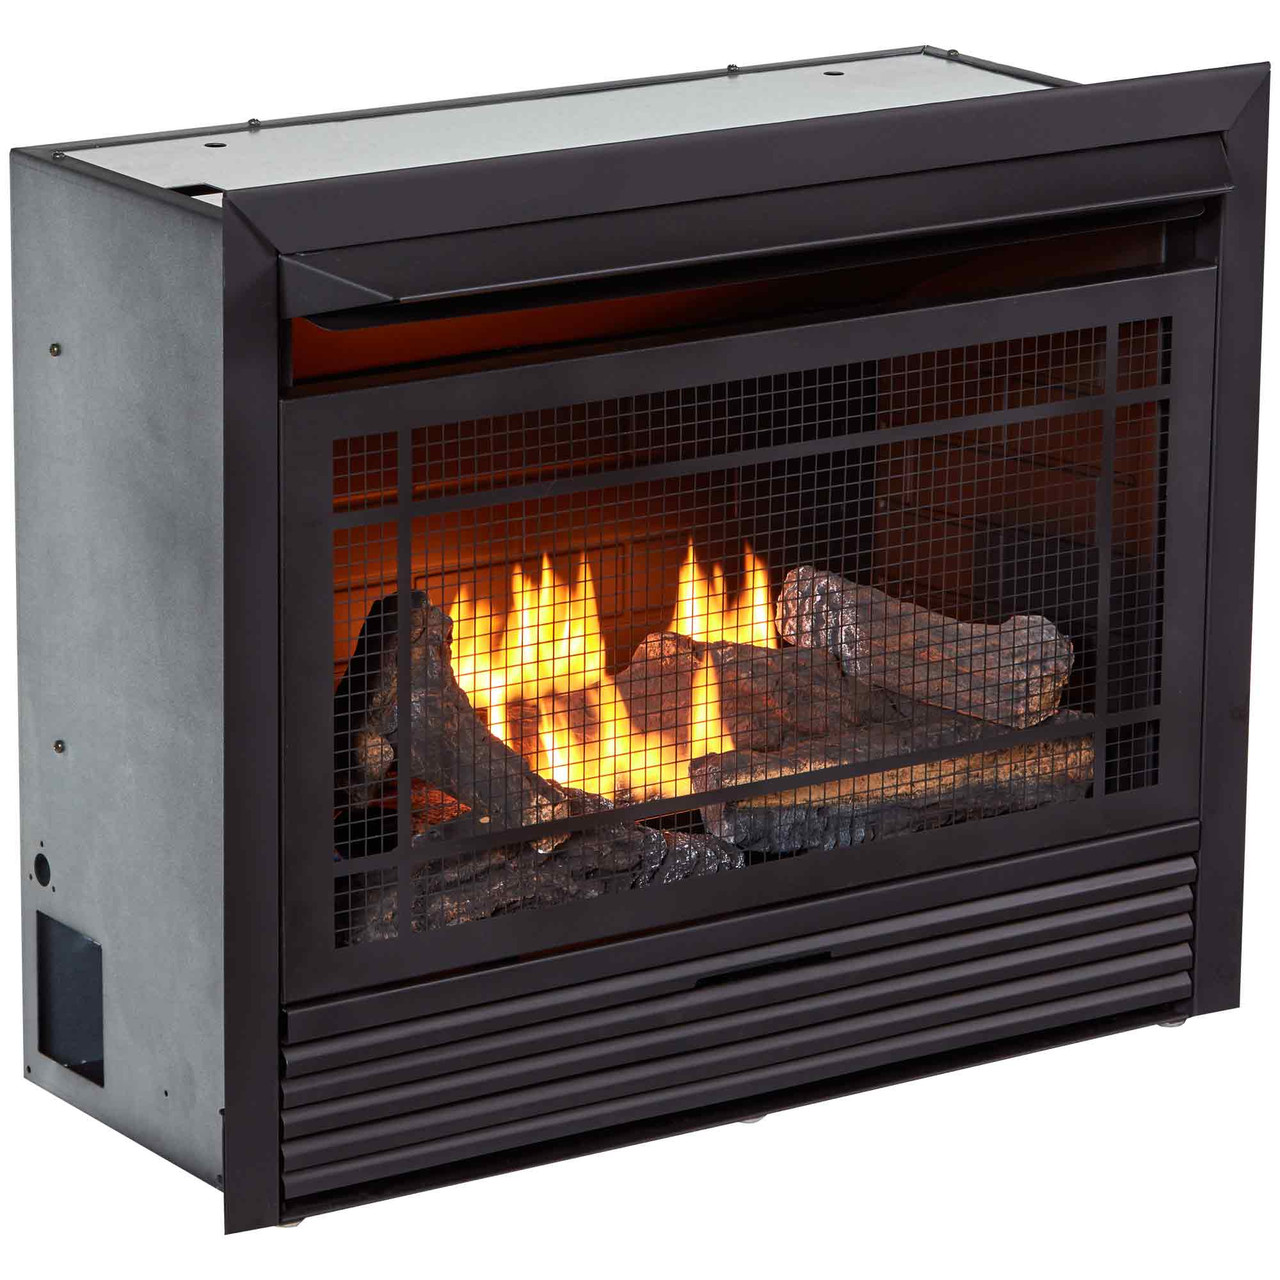 24 in Large Vent Free Fireplace Log Dual Fuel Logs Insert Natural Gas or Propane 